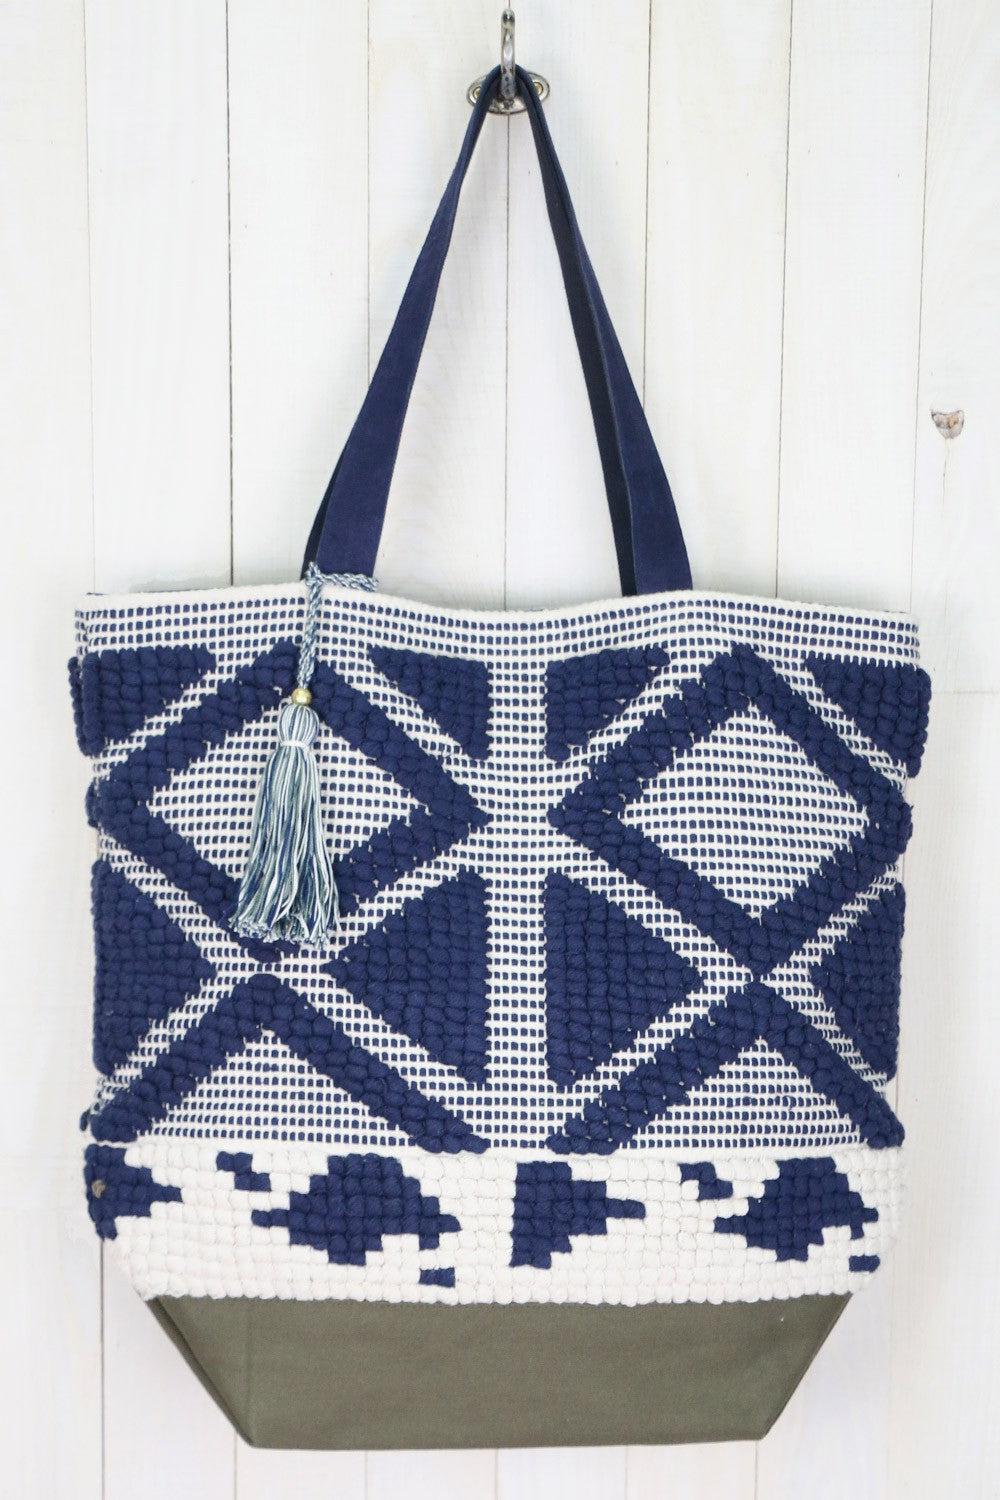 Large Diamond Patterned Tote Bag - Navy Army